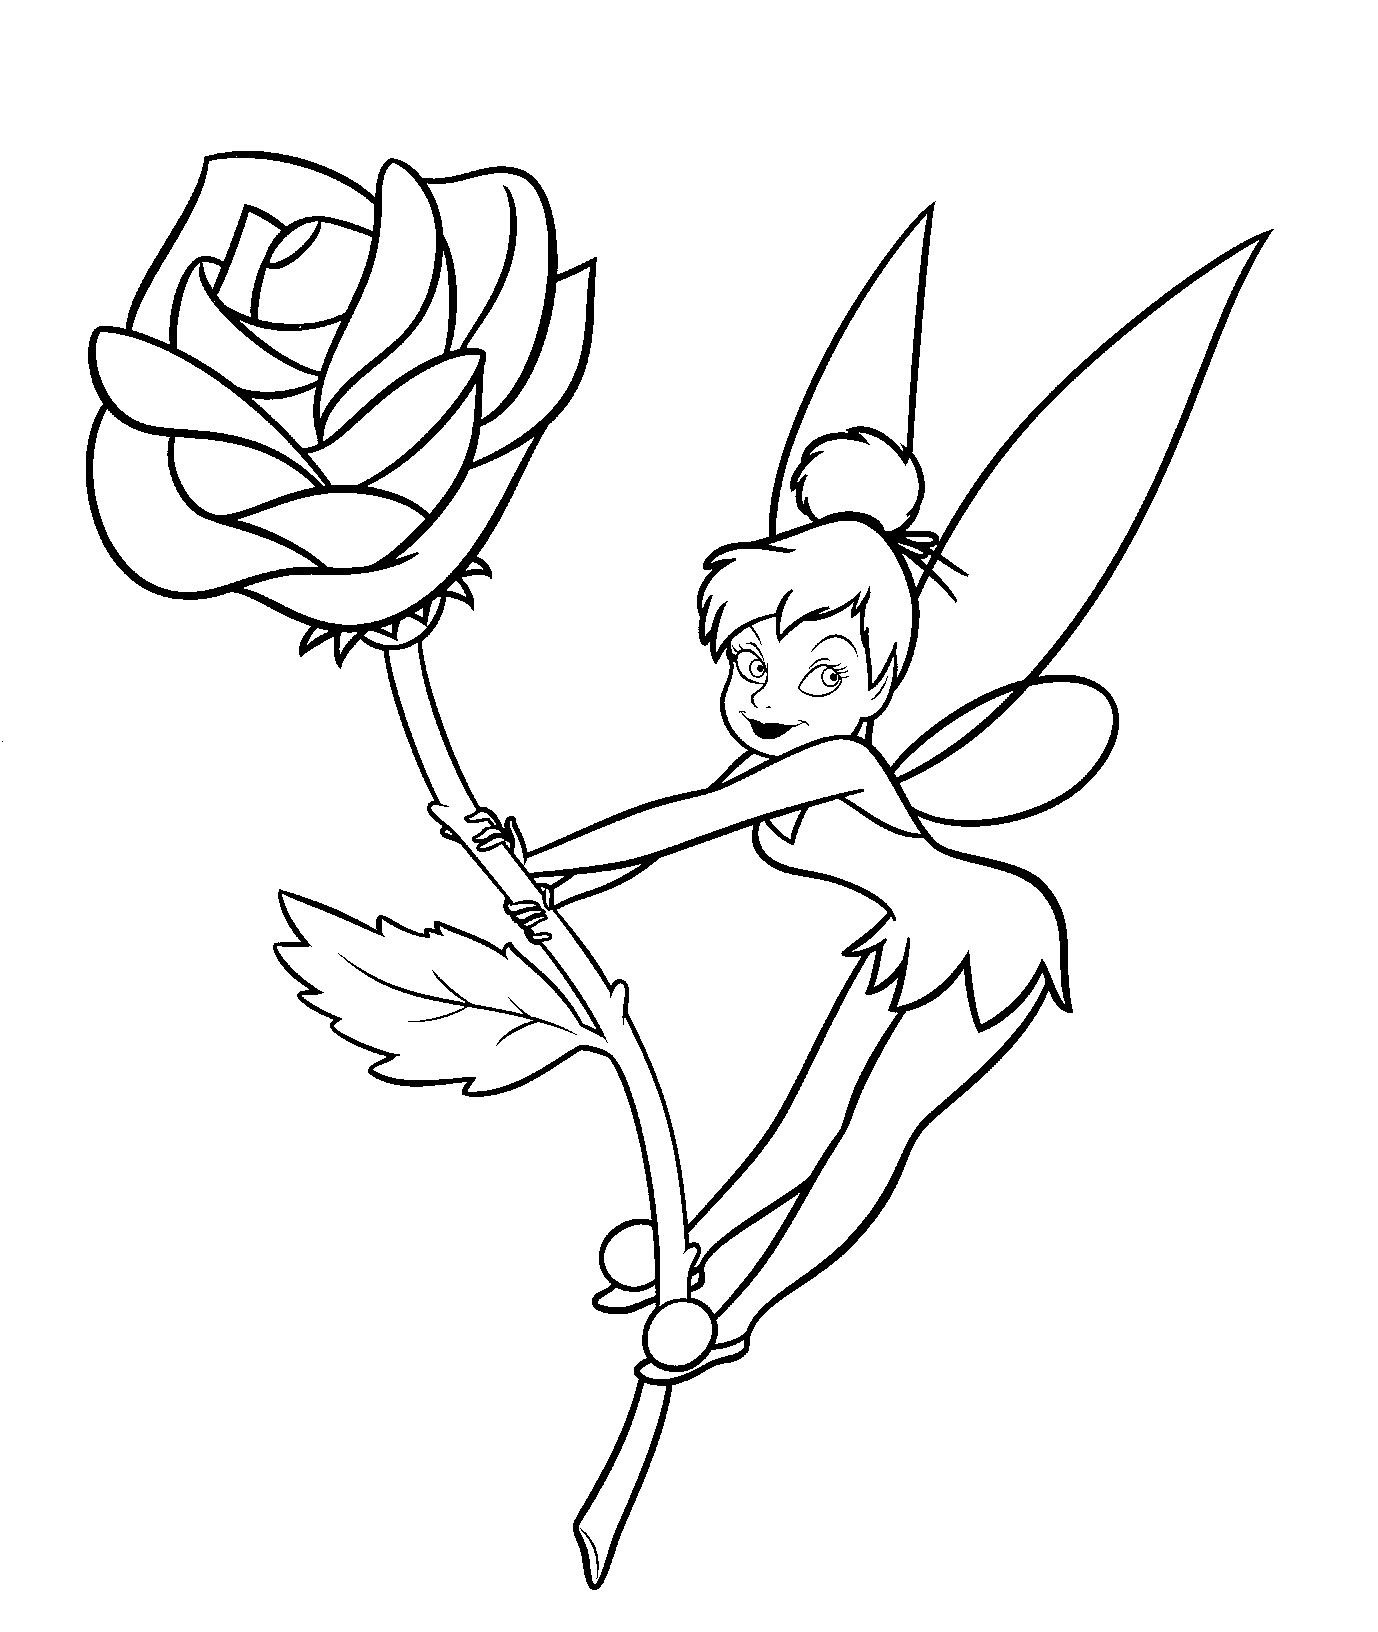 tinkerbell-printable-coloring-pages-printable-world-holiday